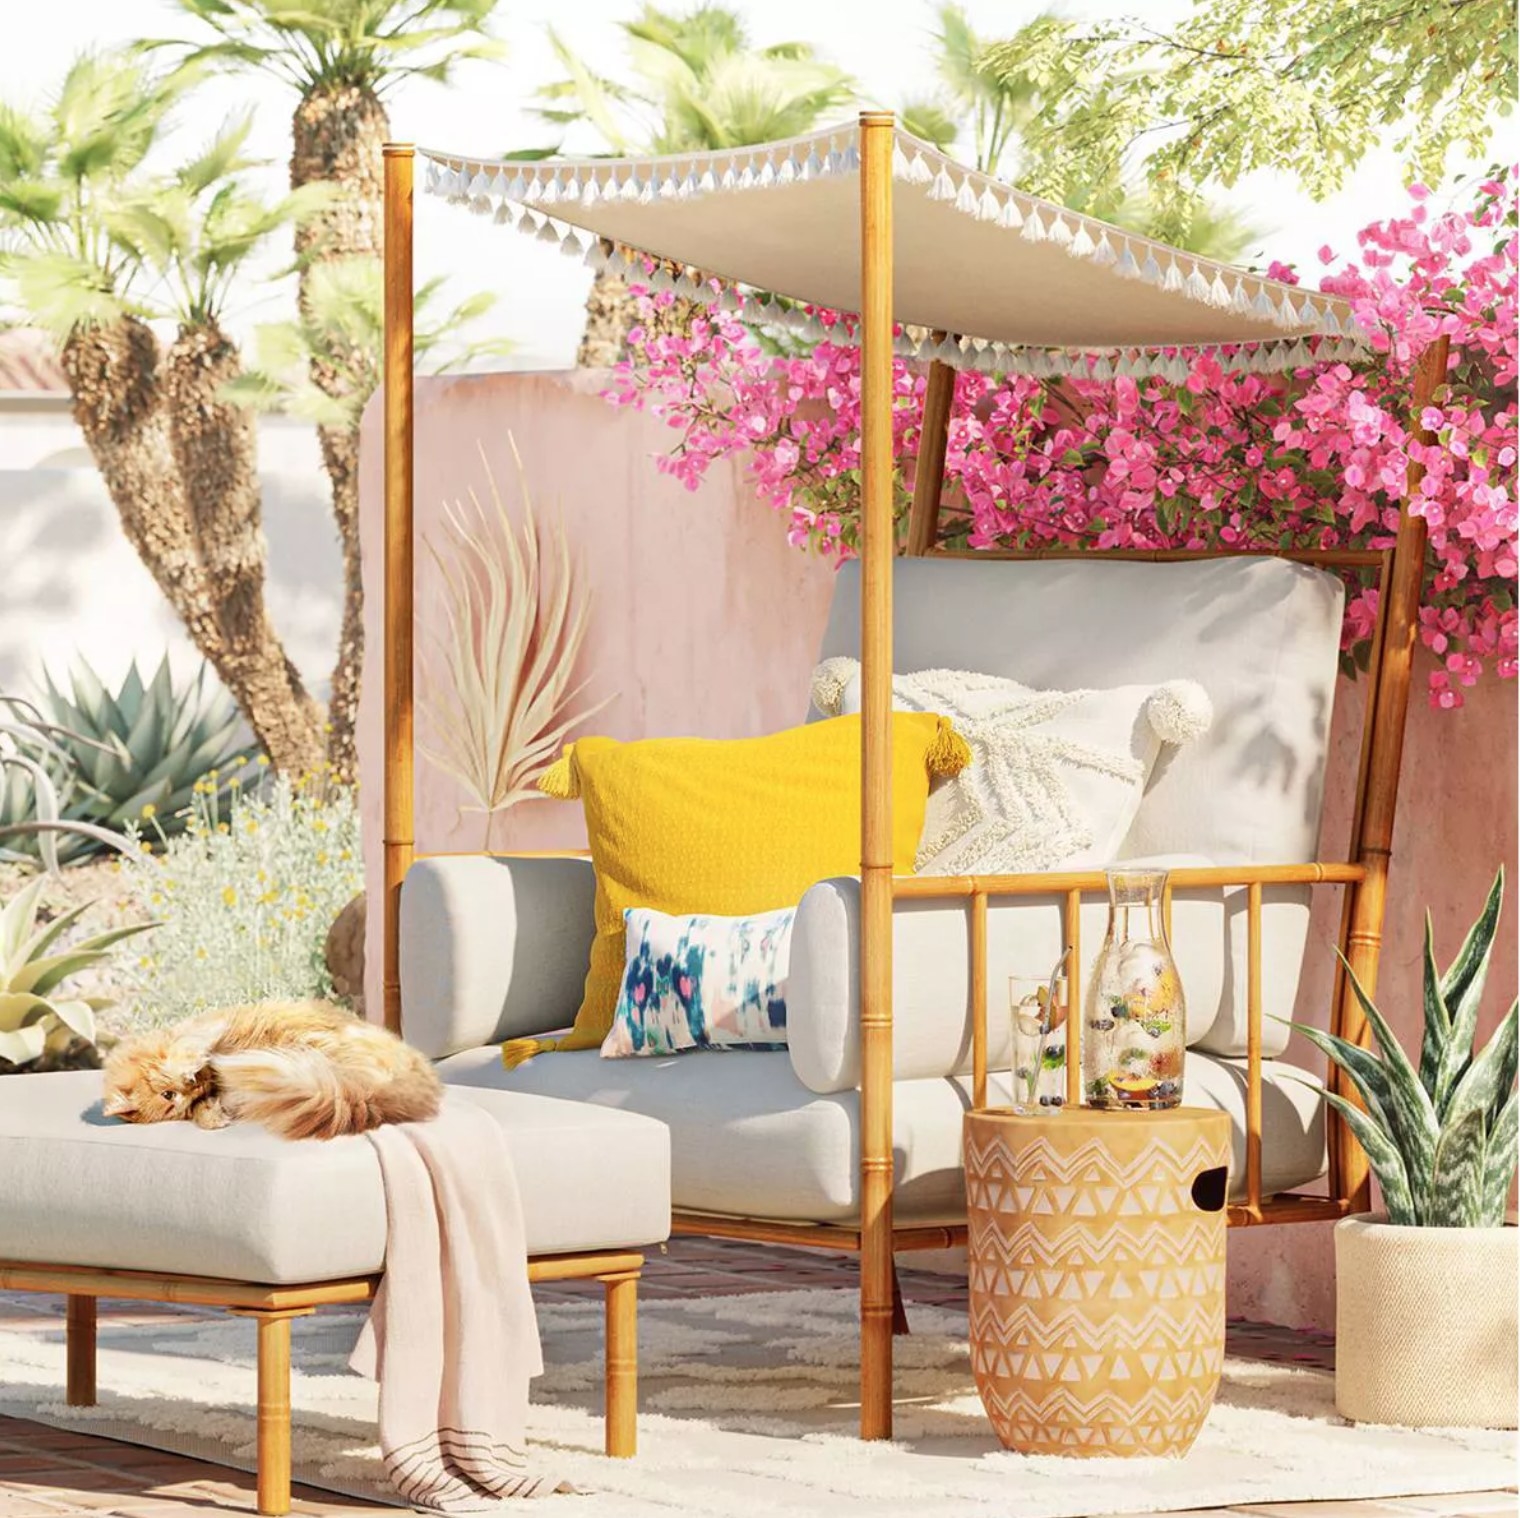 the yellow throw pillow on an outdoor patio chair